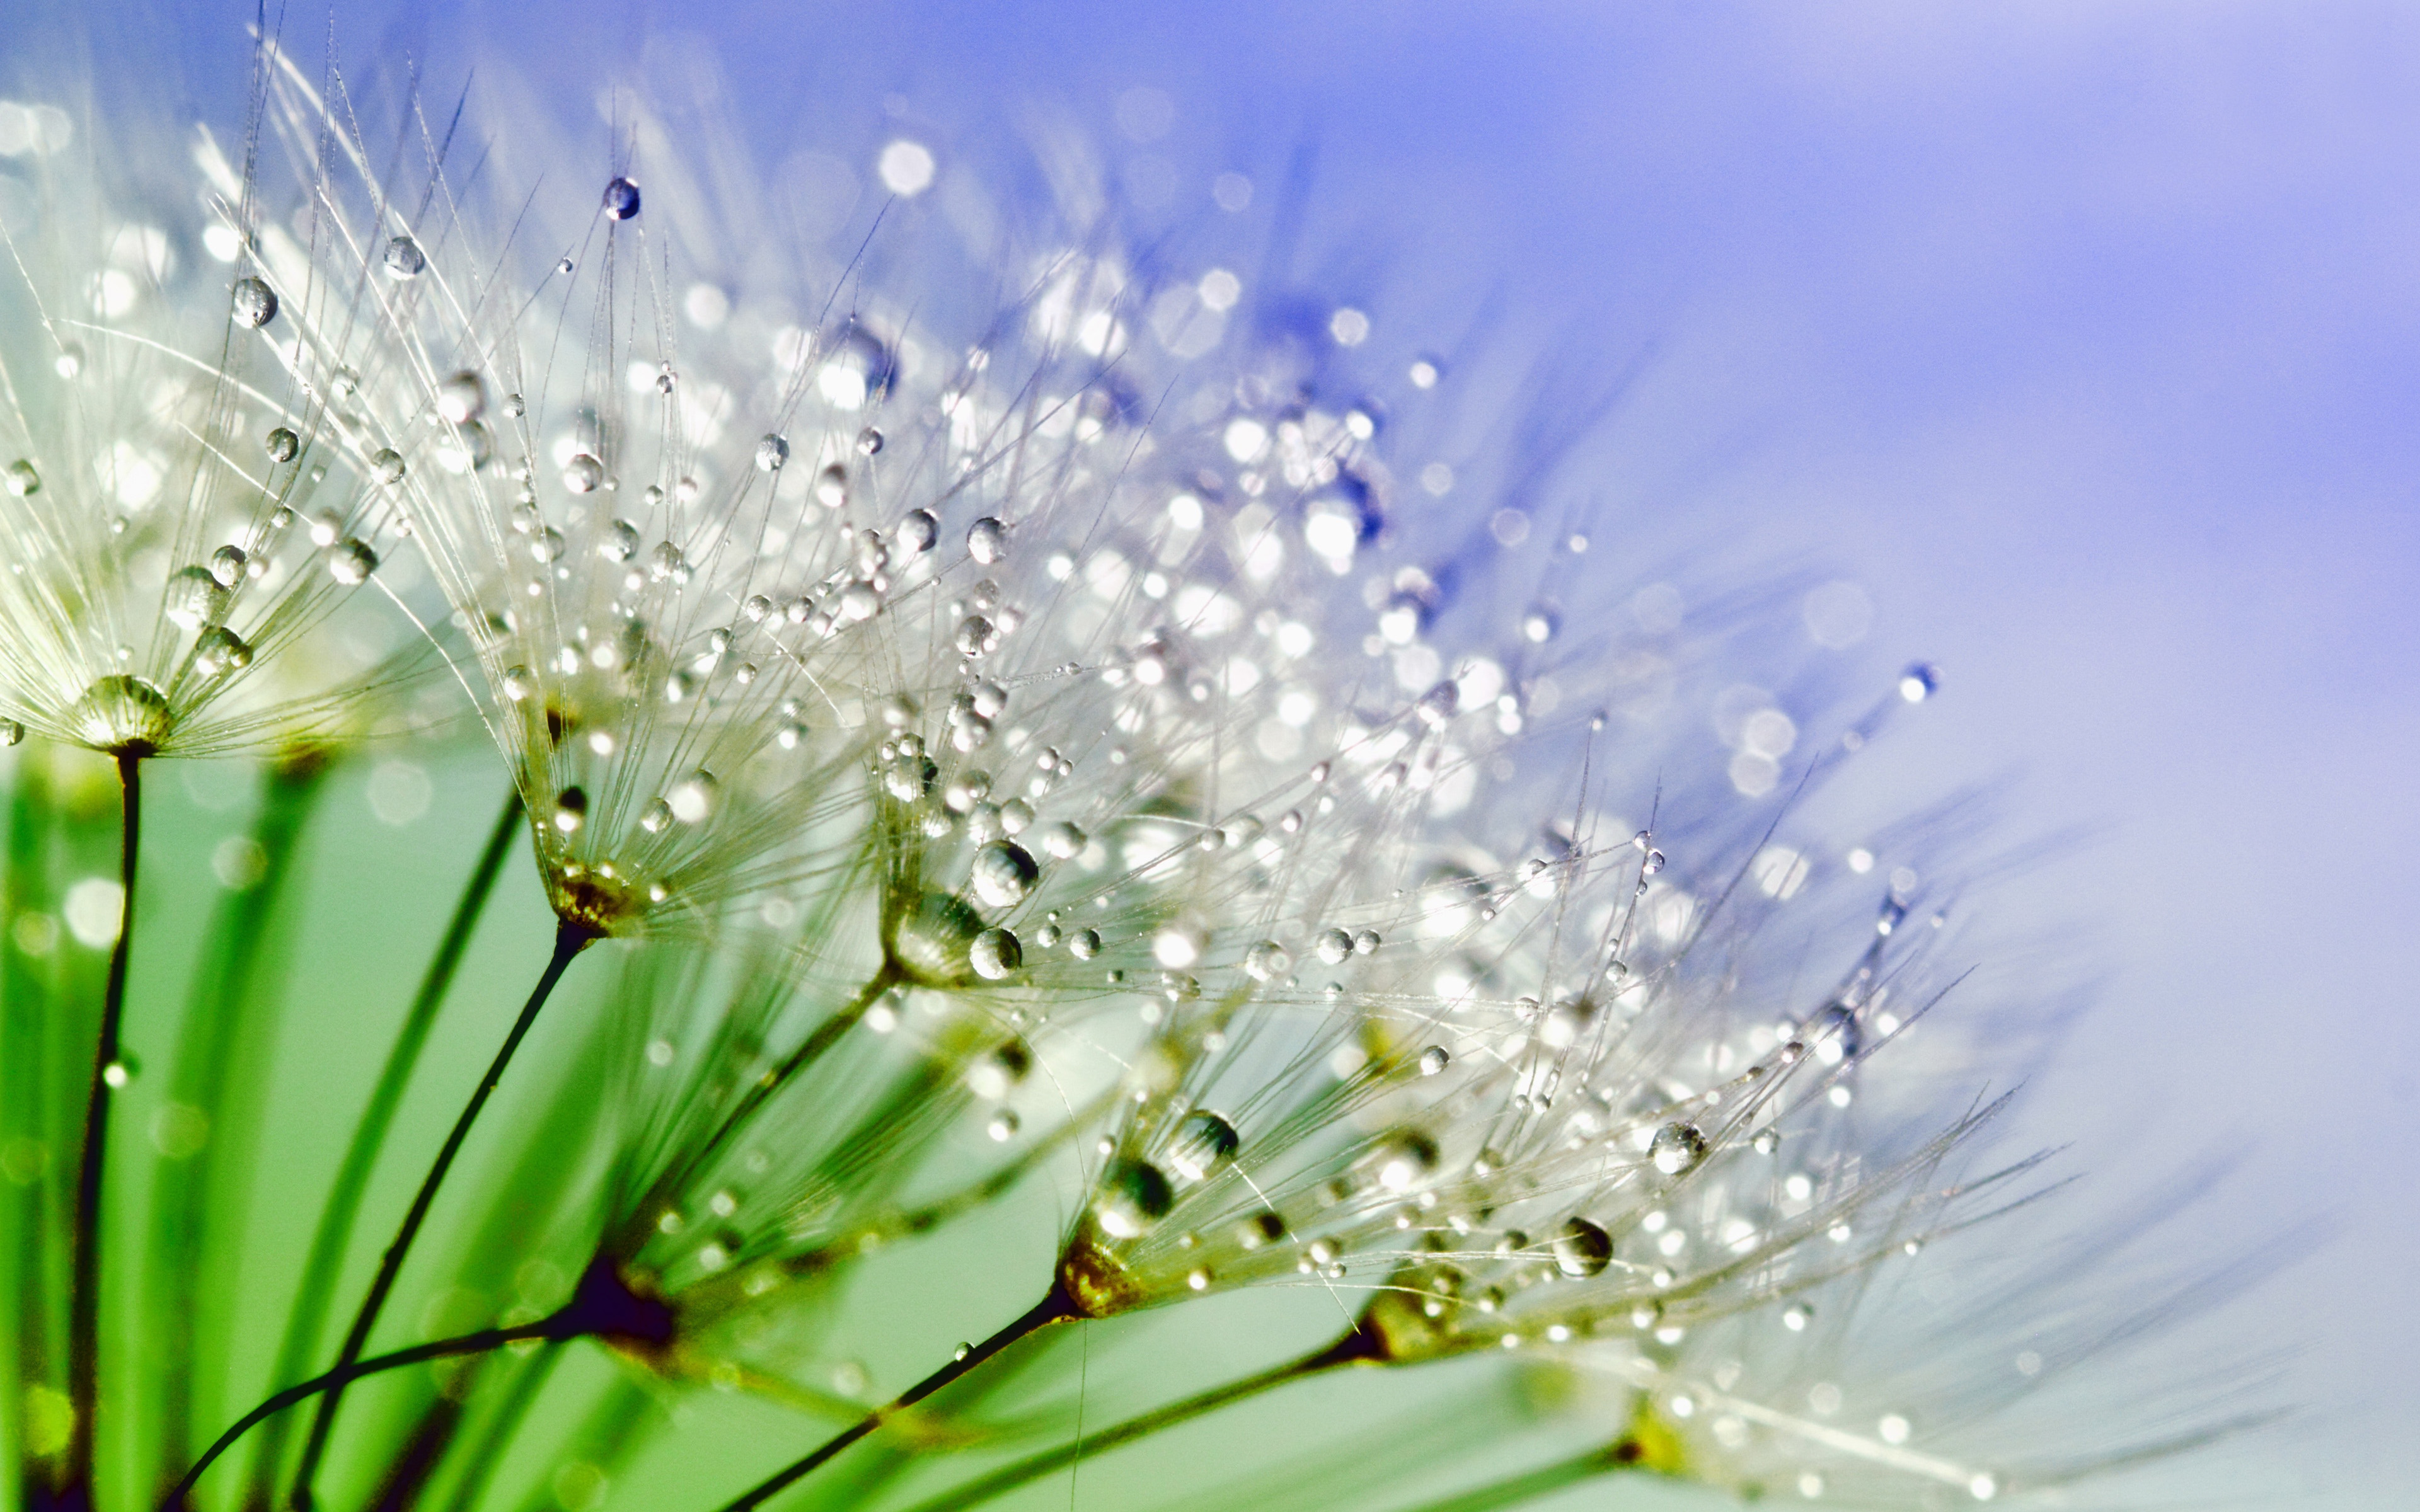 Flowers With Drops Of Water 4k Wallpaper Download For Desktop Mobile Phones  And Laptops 3840x2400 : 